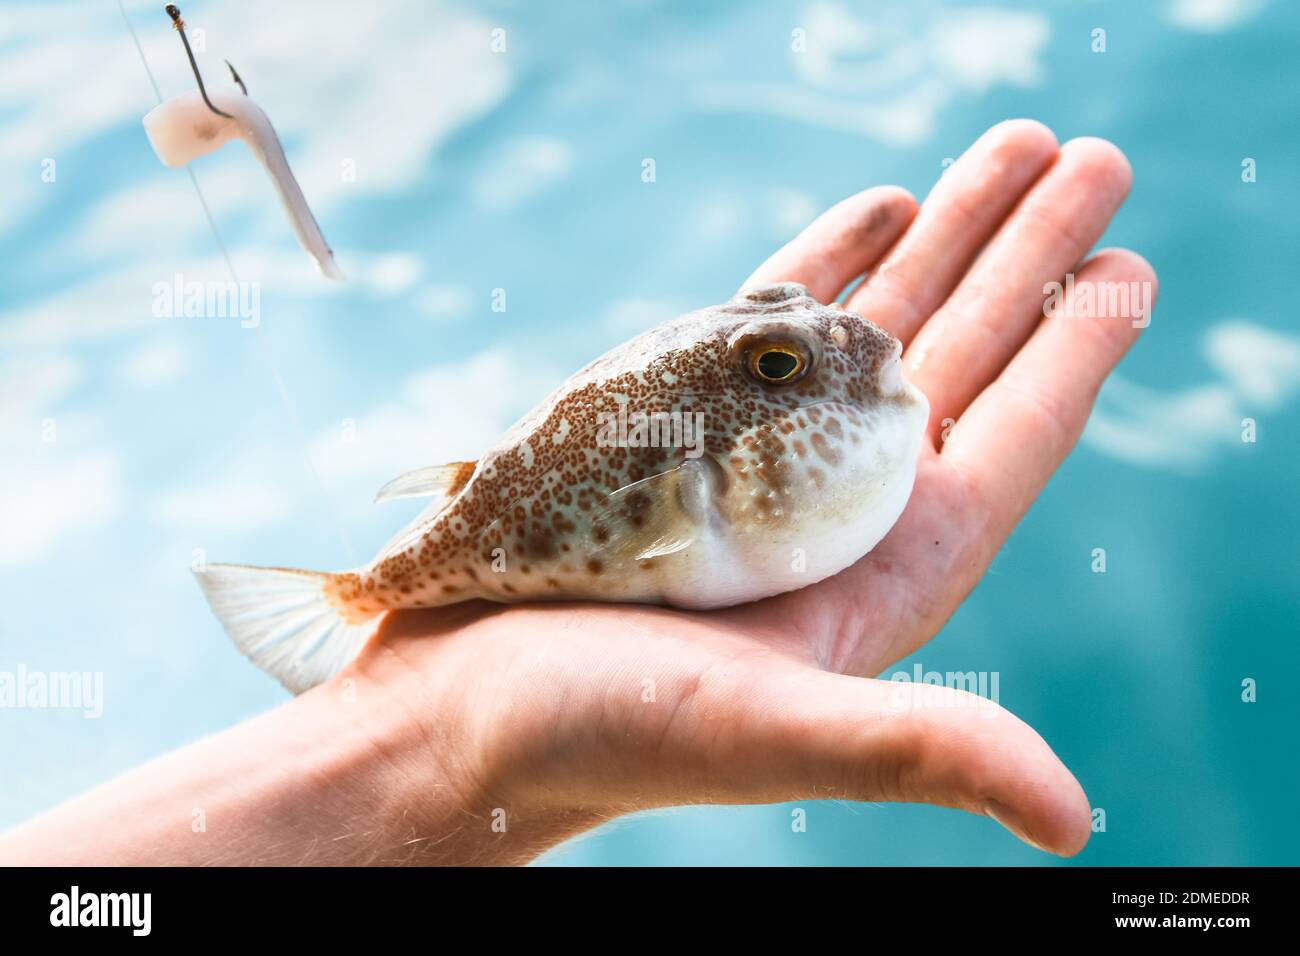 A poisonous puffer fish (Fugu) is lying on the palm of hand, caught while fishing in the Gulf of Thailand. Stock Photo